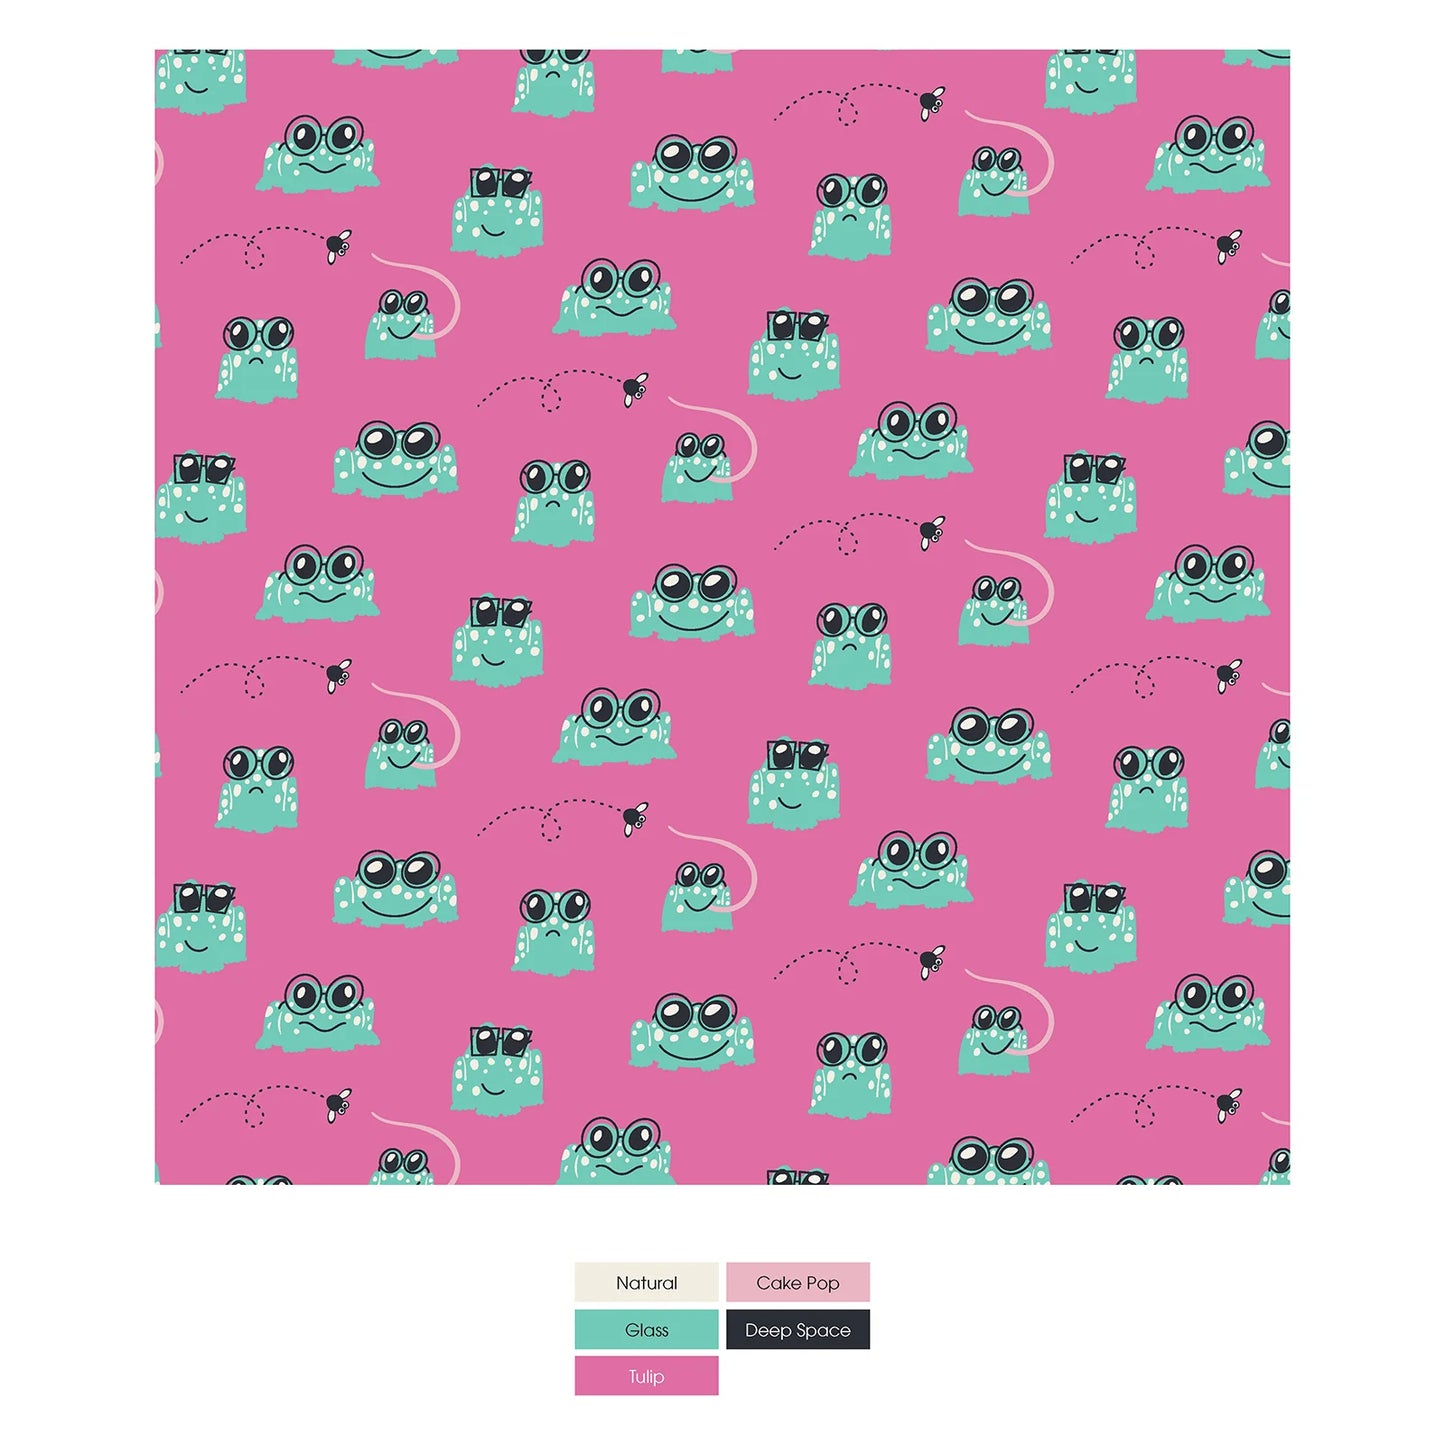 Kickee Tulip Bespeckled Frogs | Print Ruffle Toddler Blanket